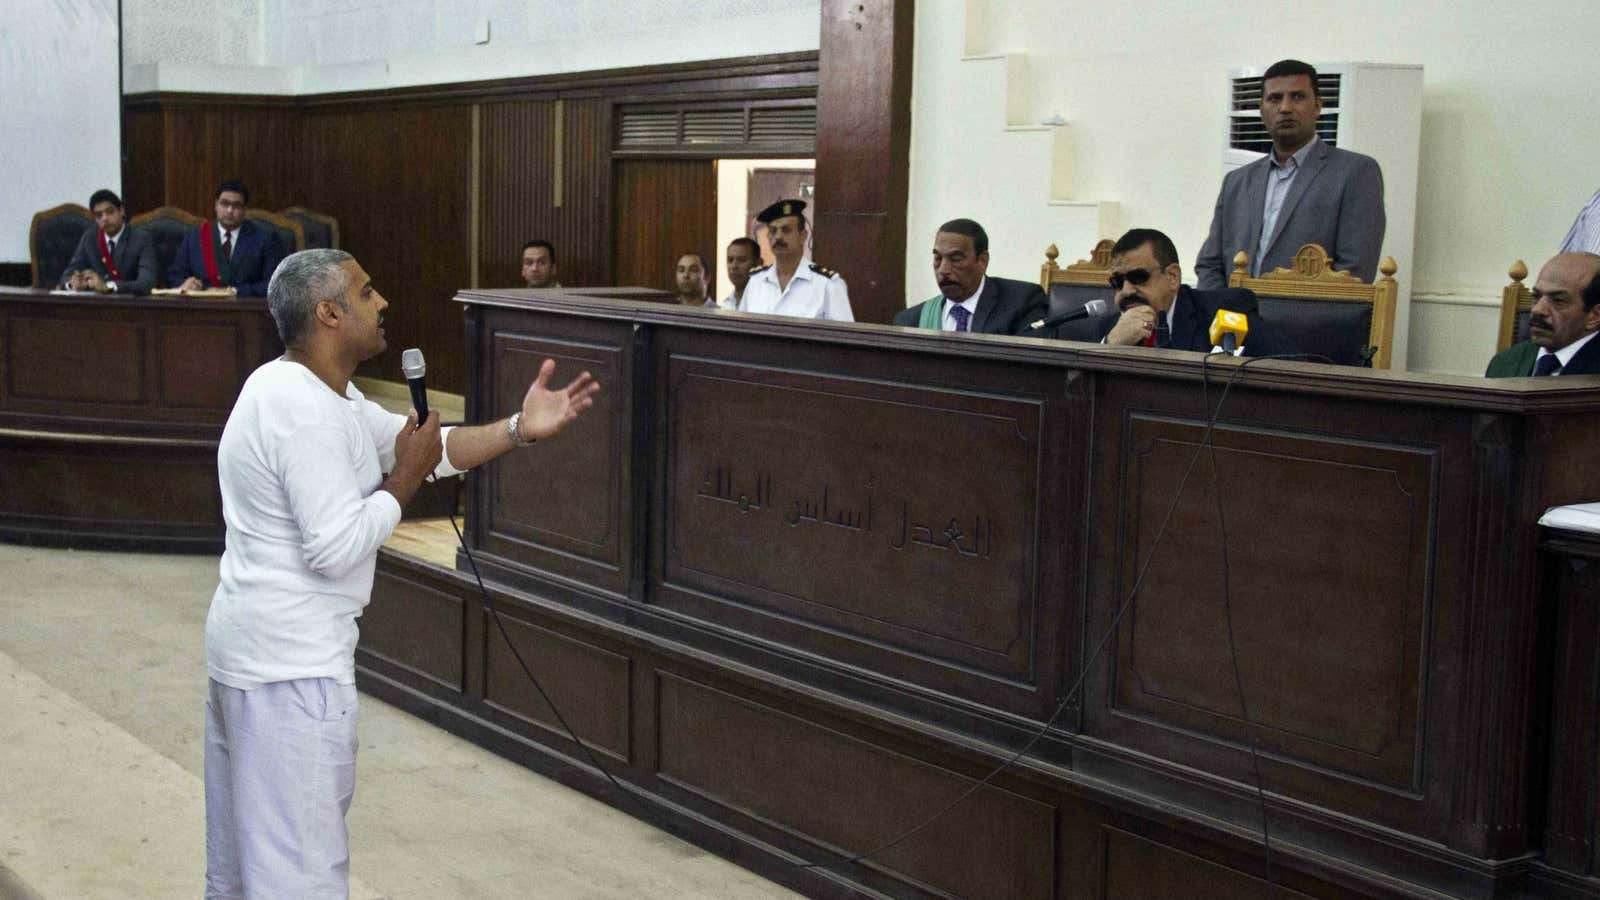 Mohammed Fahmy talks to the judge in a courthouse near Tora prison.